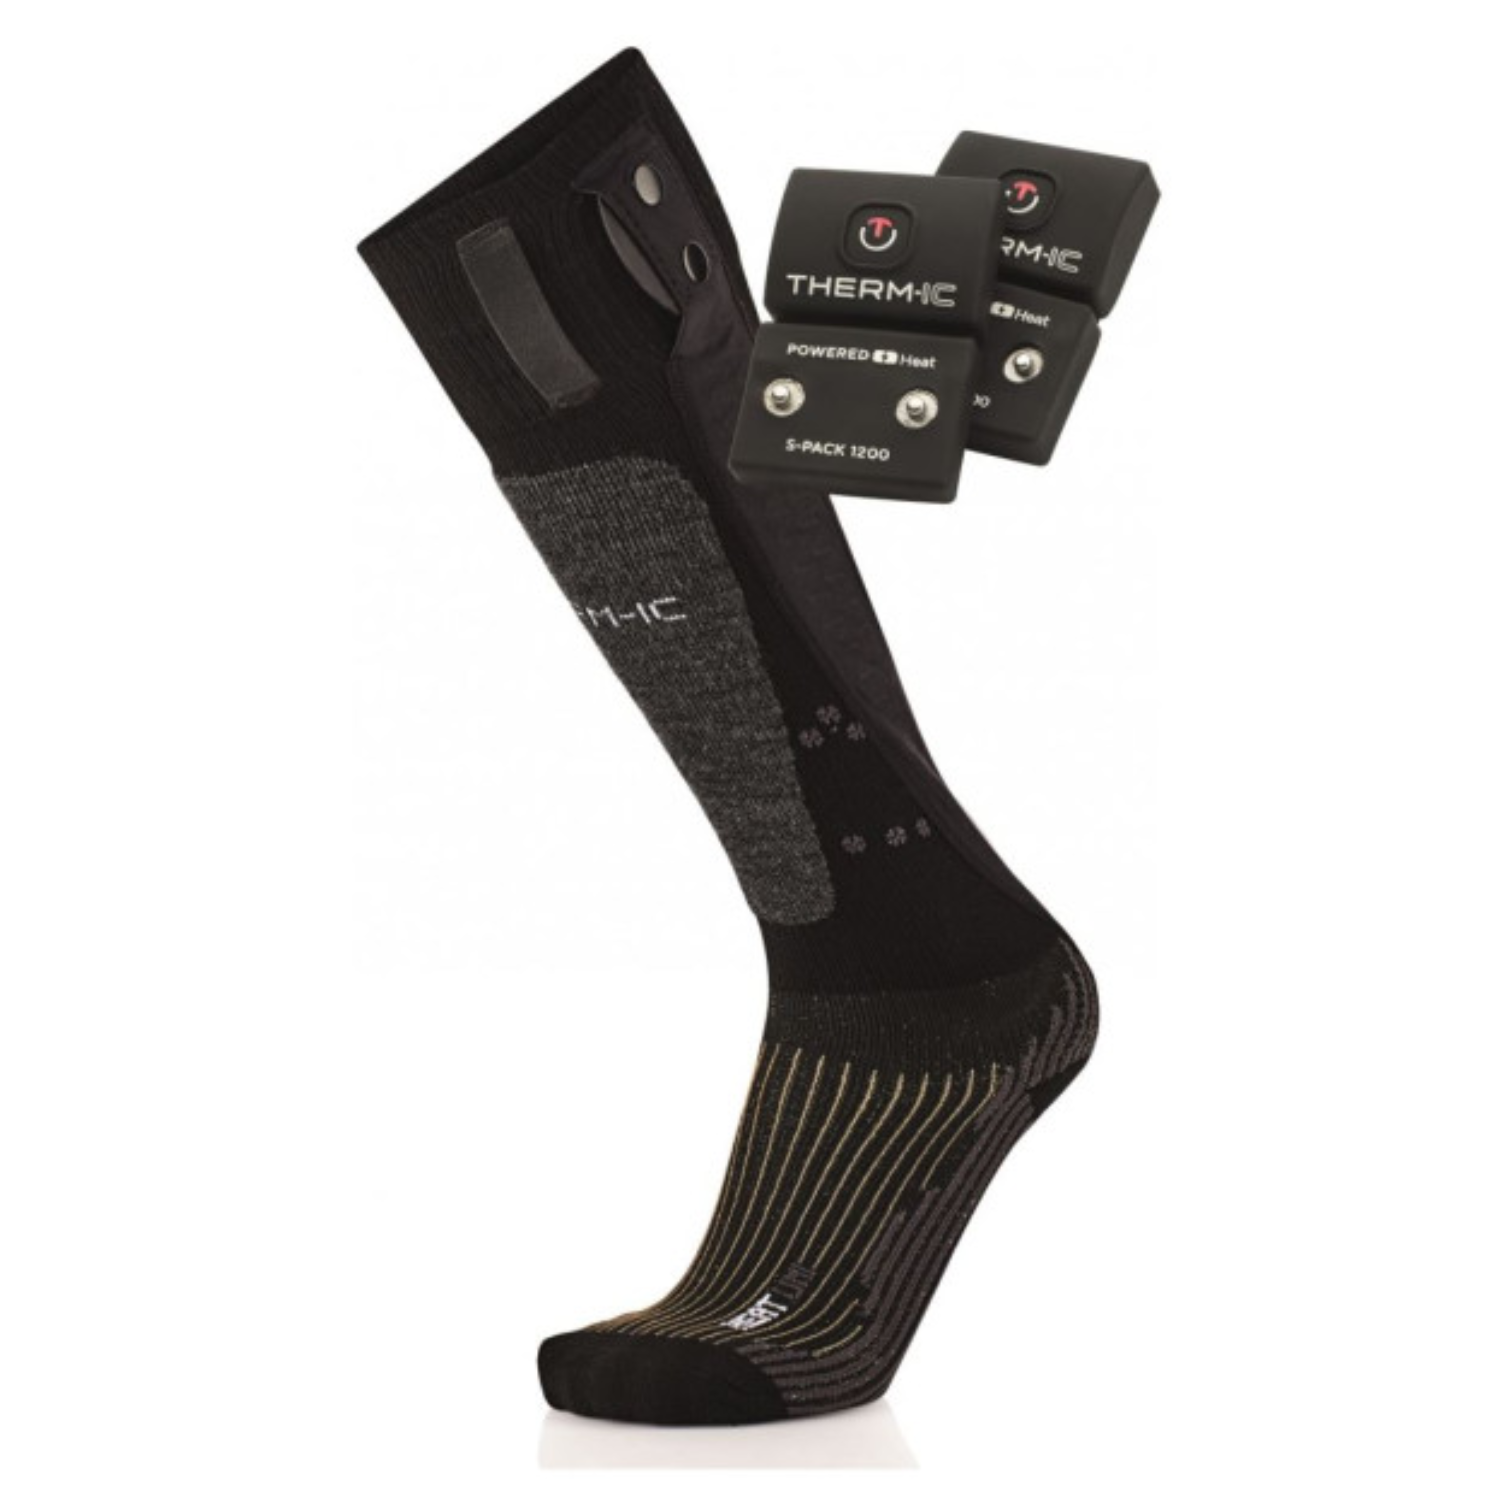 Thermic Heat Fusion Unisex Socks +S Pack 1200 Batteries